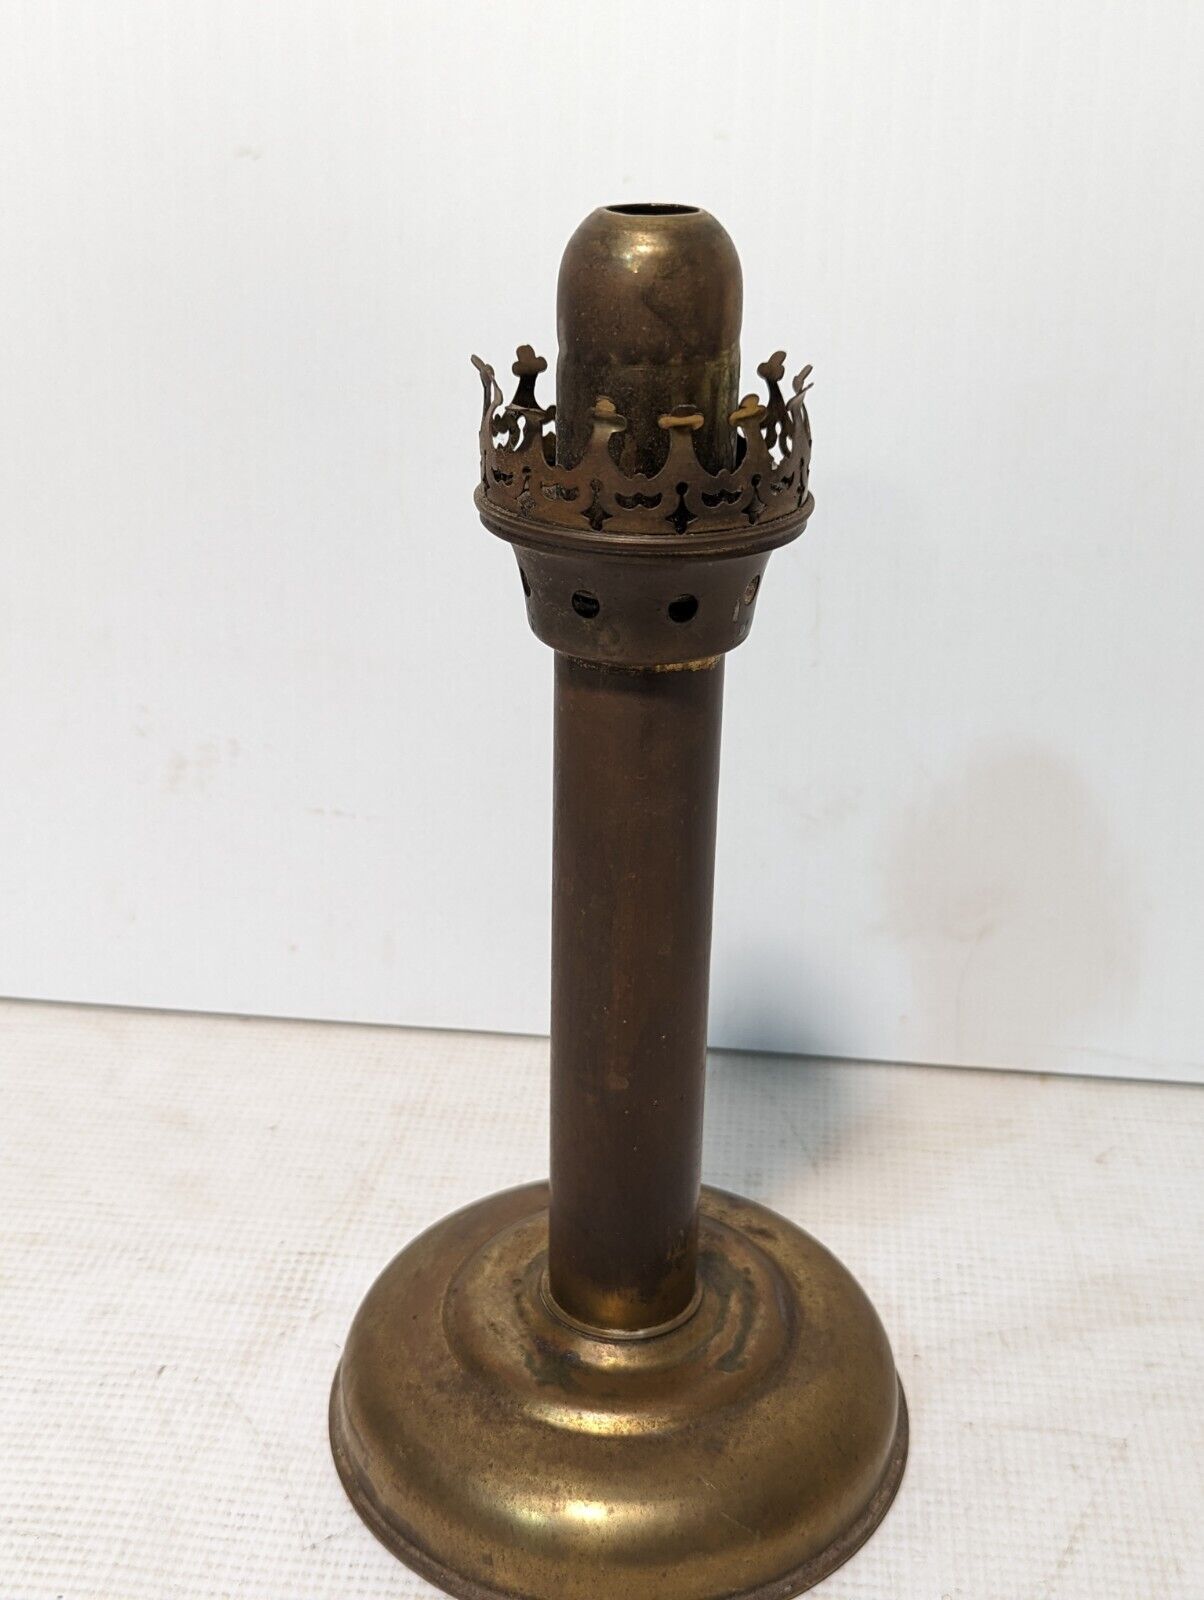 Vintage Brass Spring Loaded Push-up Candle Hurricane Lamp - 